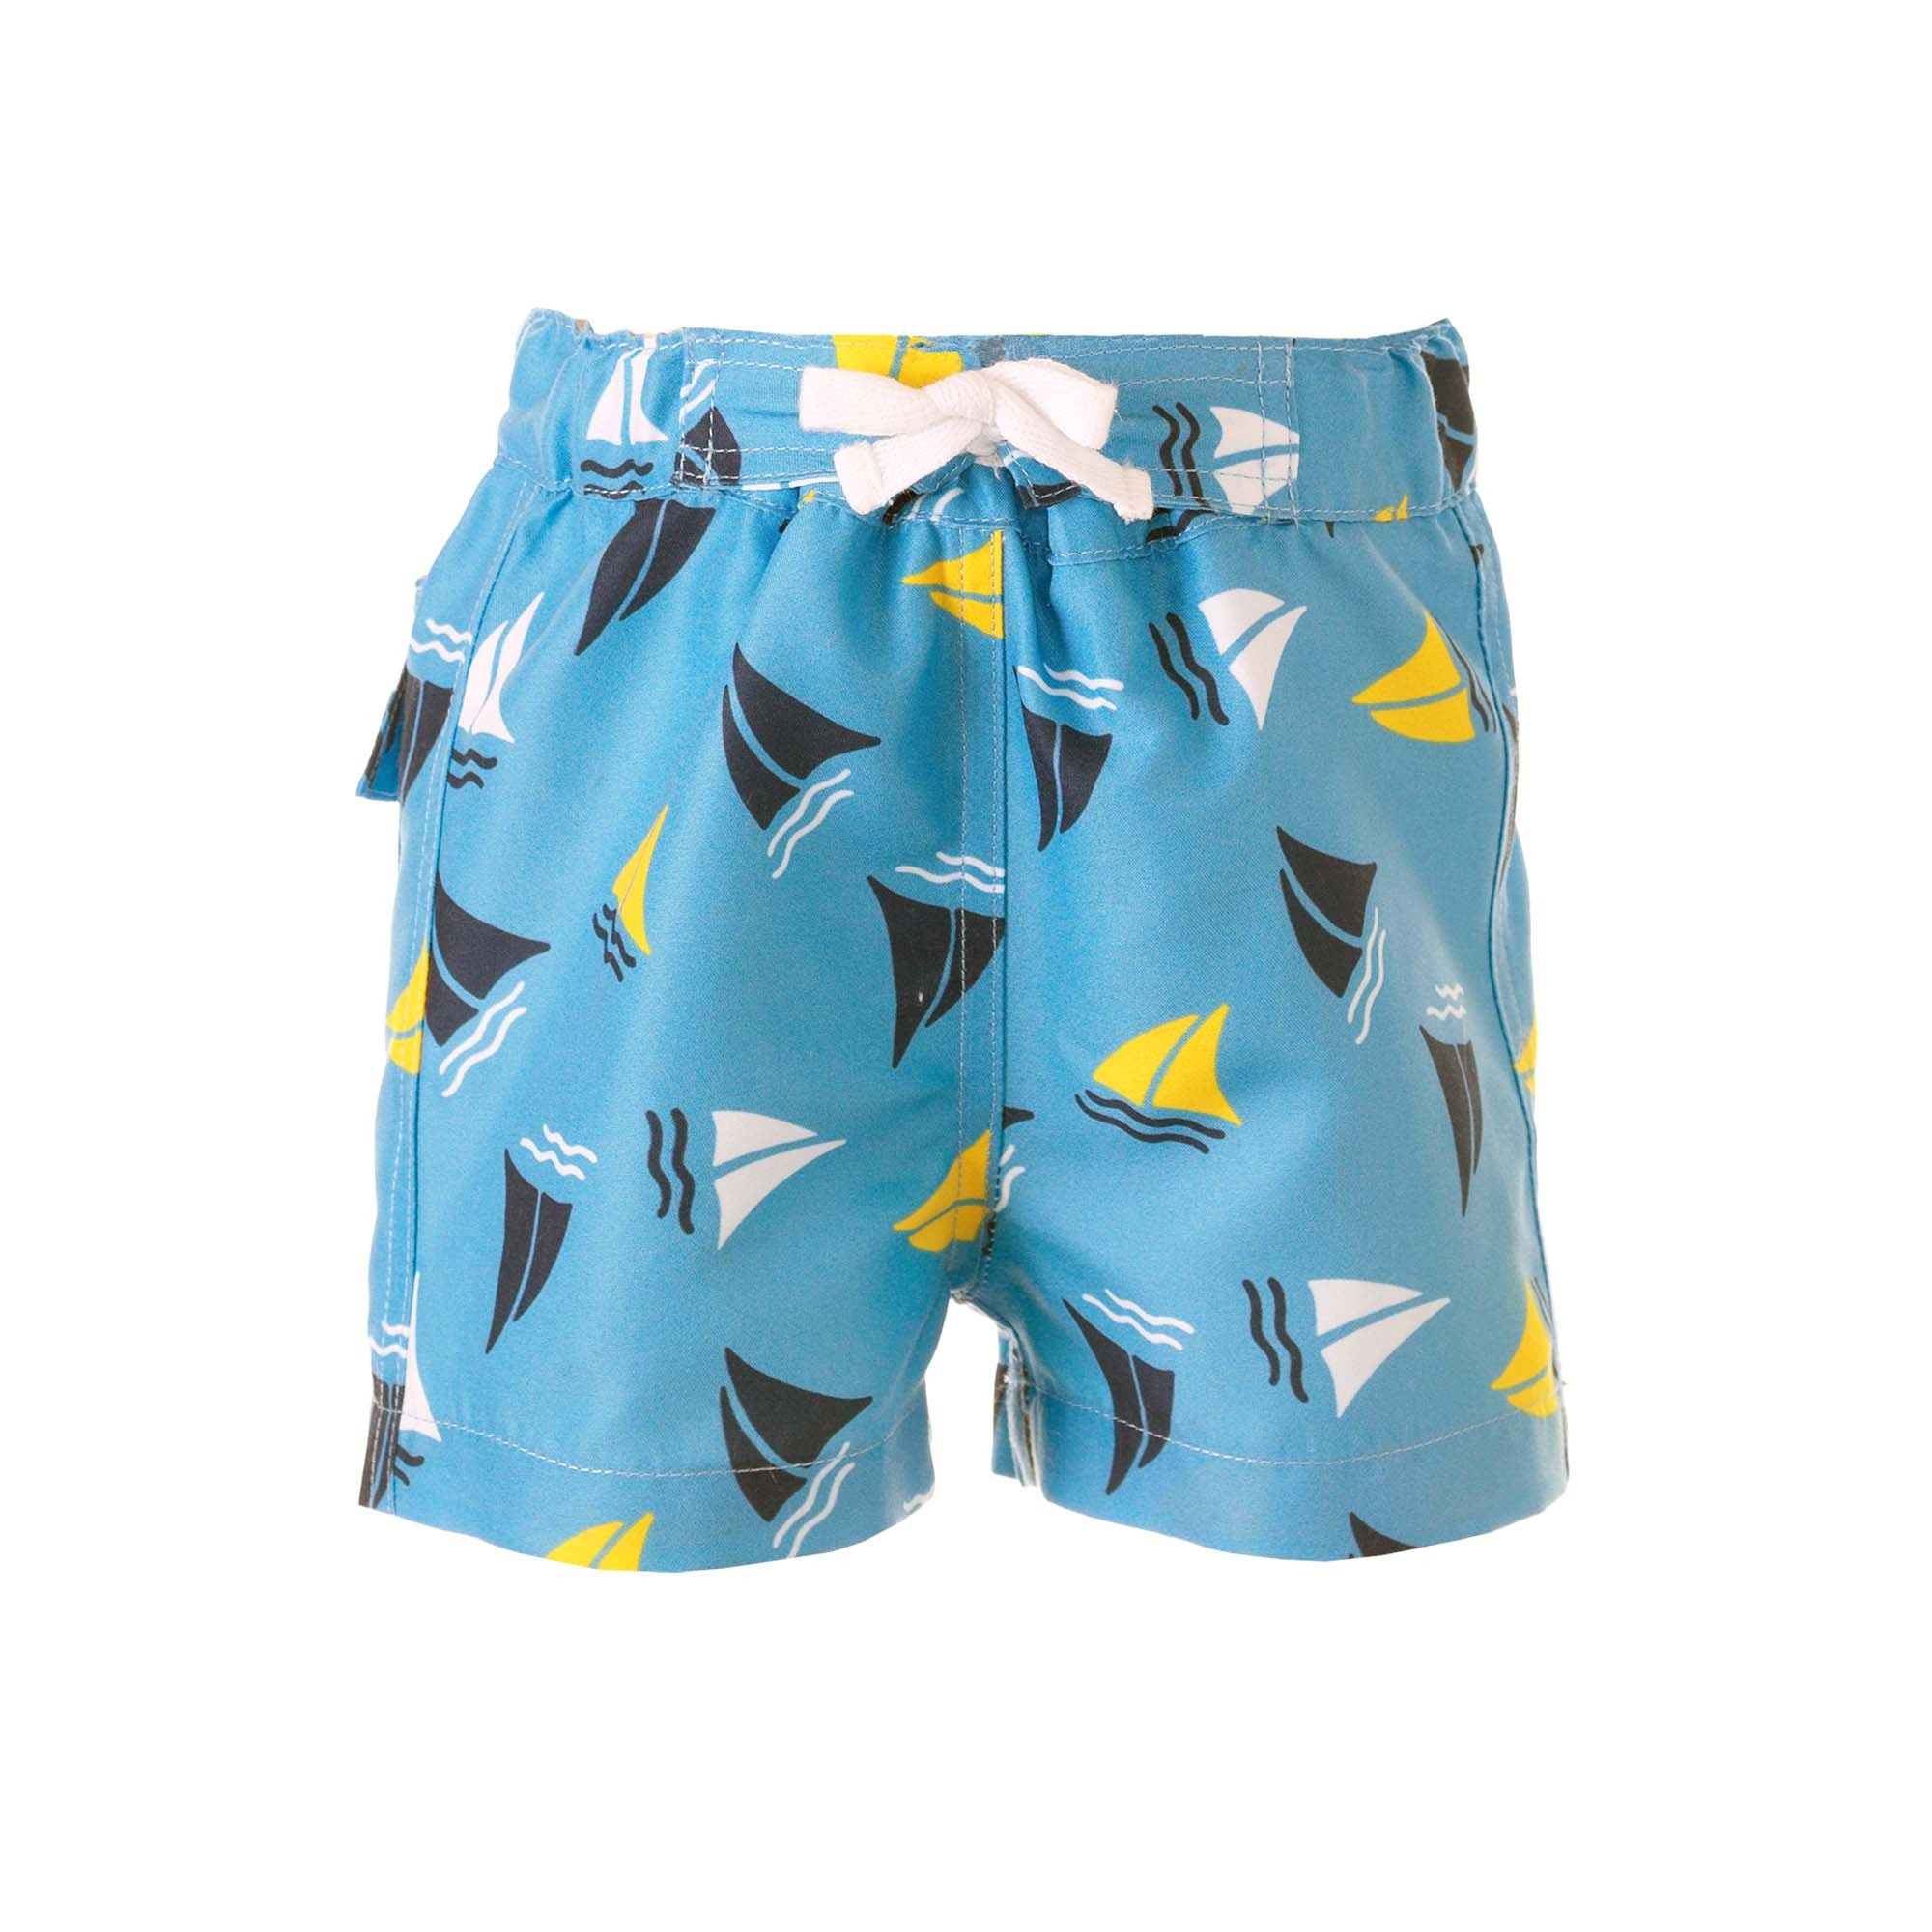 Boys Swimshorts with Blue Sailboats